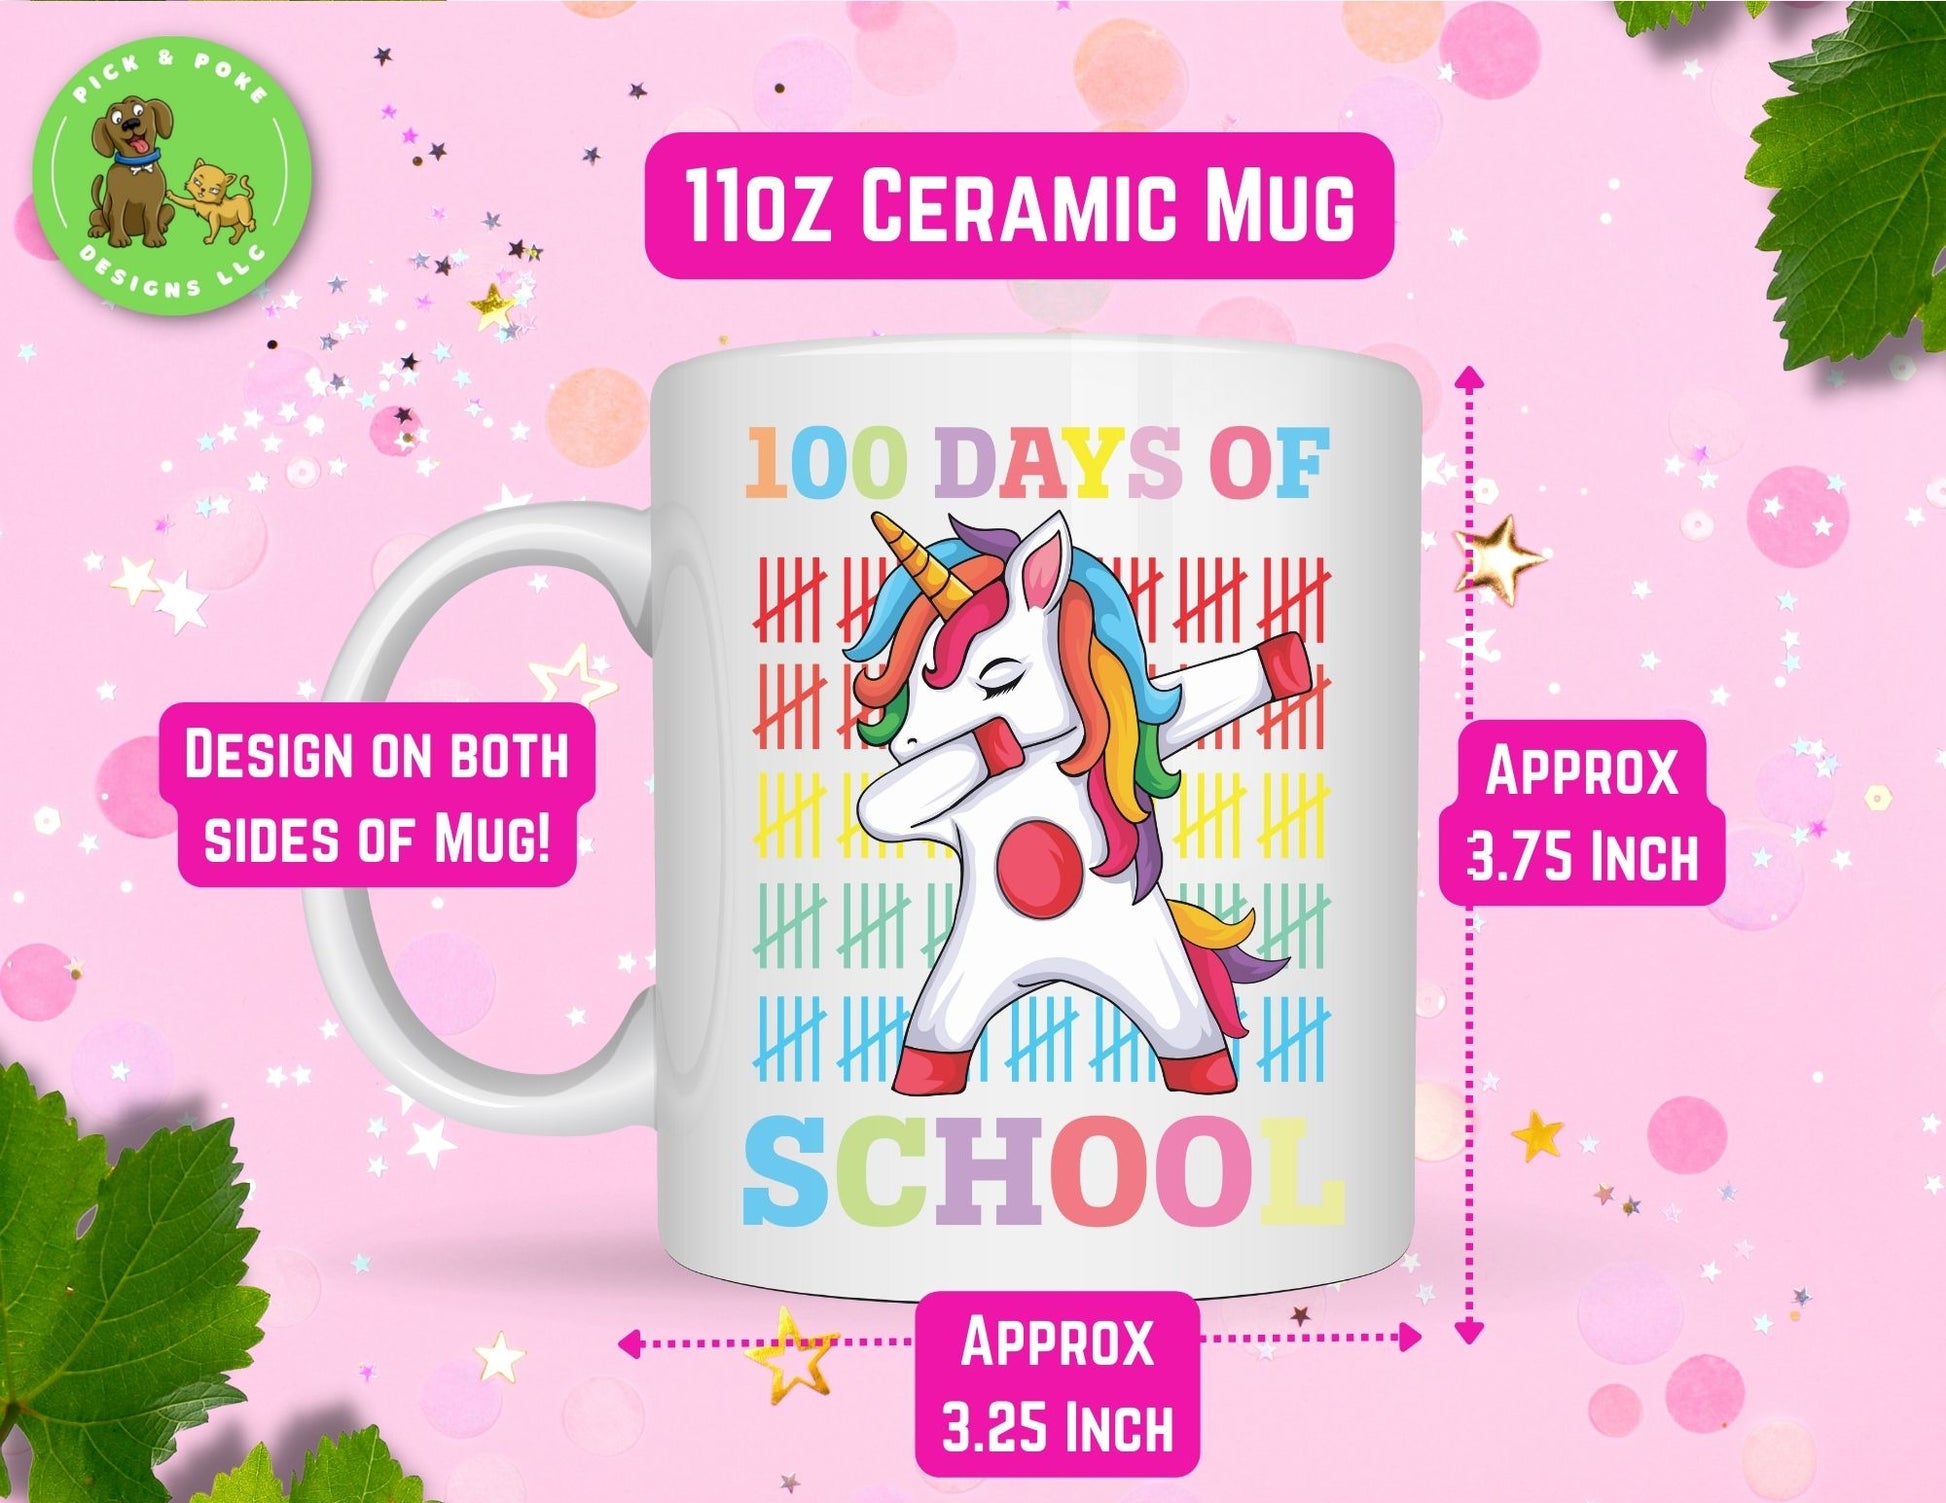 100 Days of Schools has the design printed on both sides of the 11oz ceramic mug